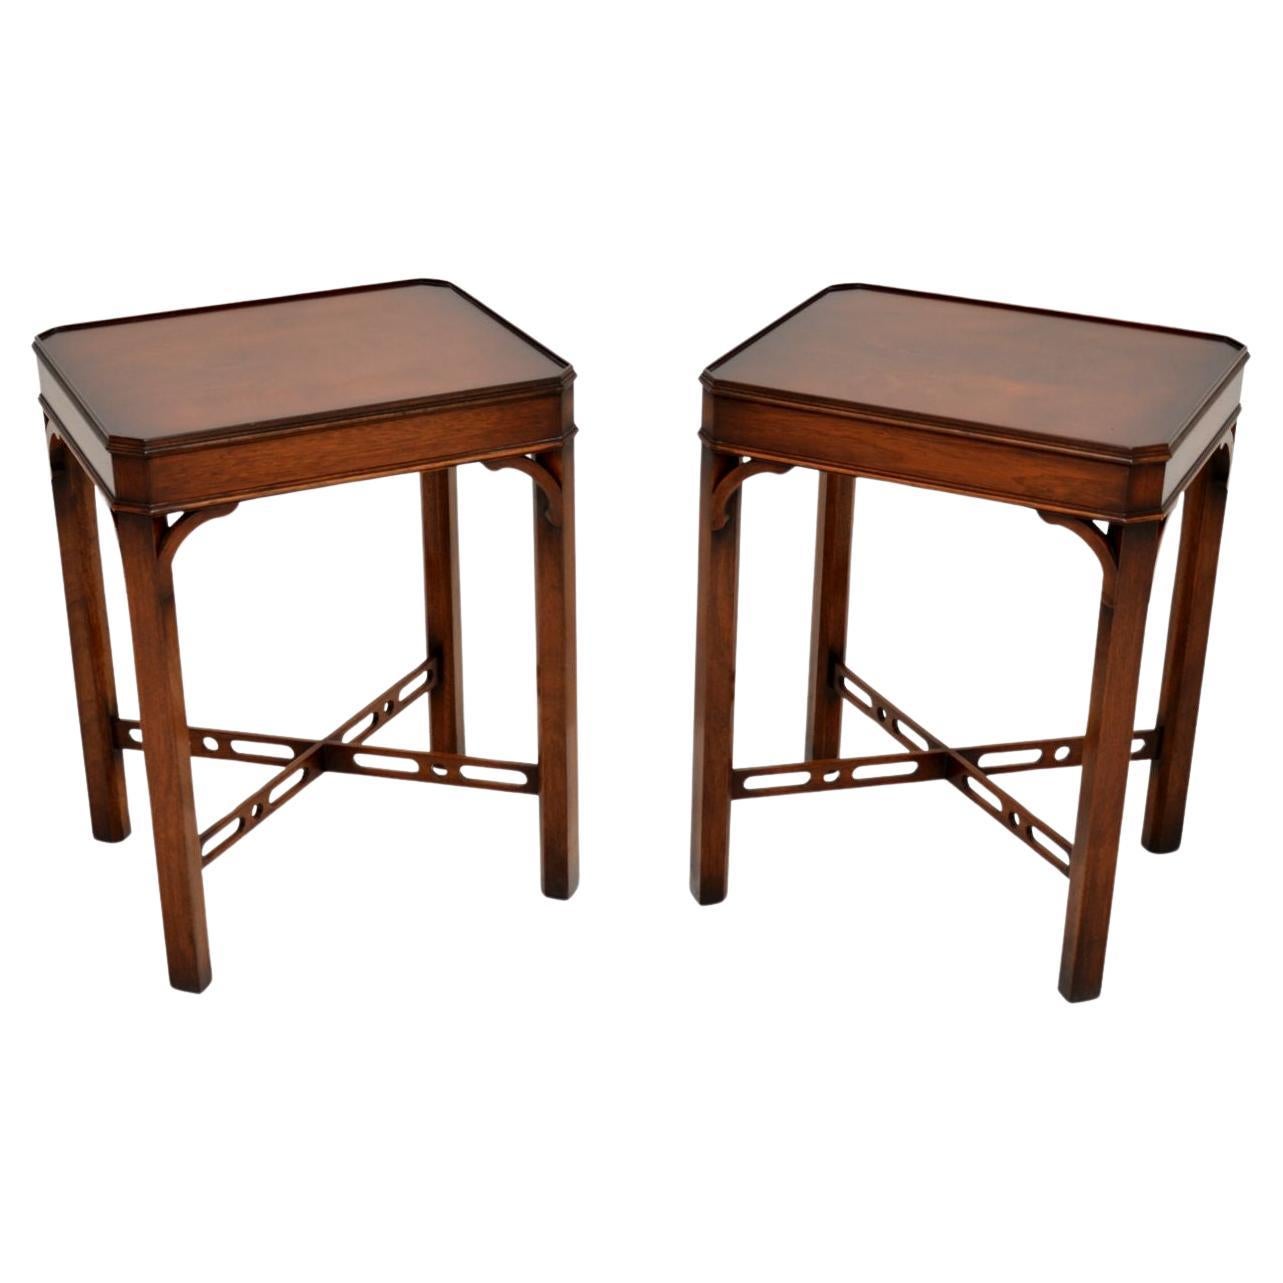 Pair of Antique Georgian Style Side Tables